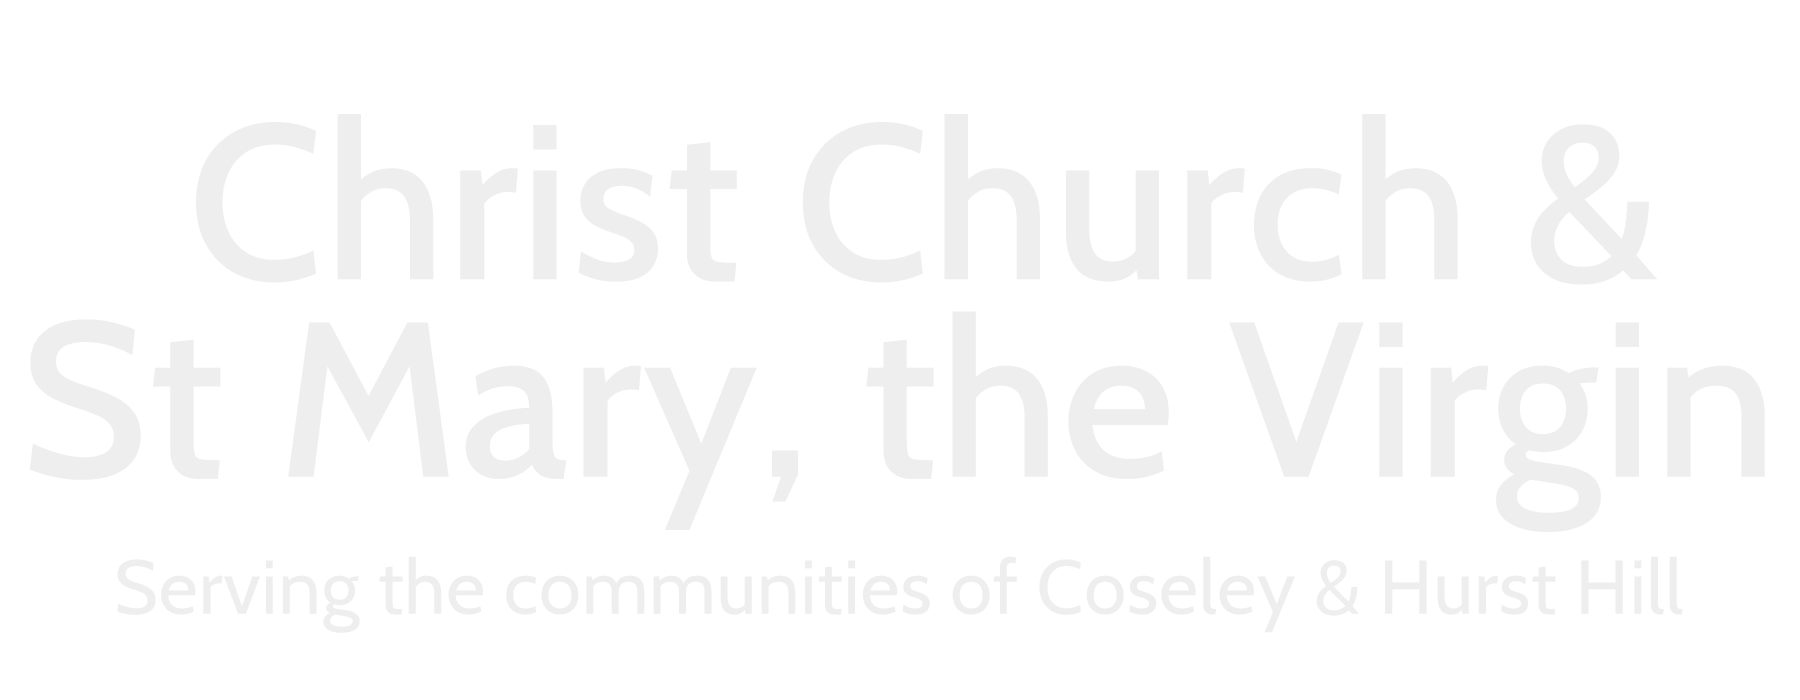 Christ Church and St Mary, the Virgin. Serving the communities of Coseley and Hurst Hill